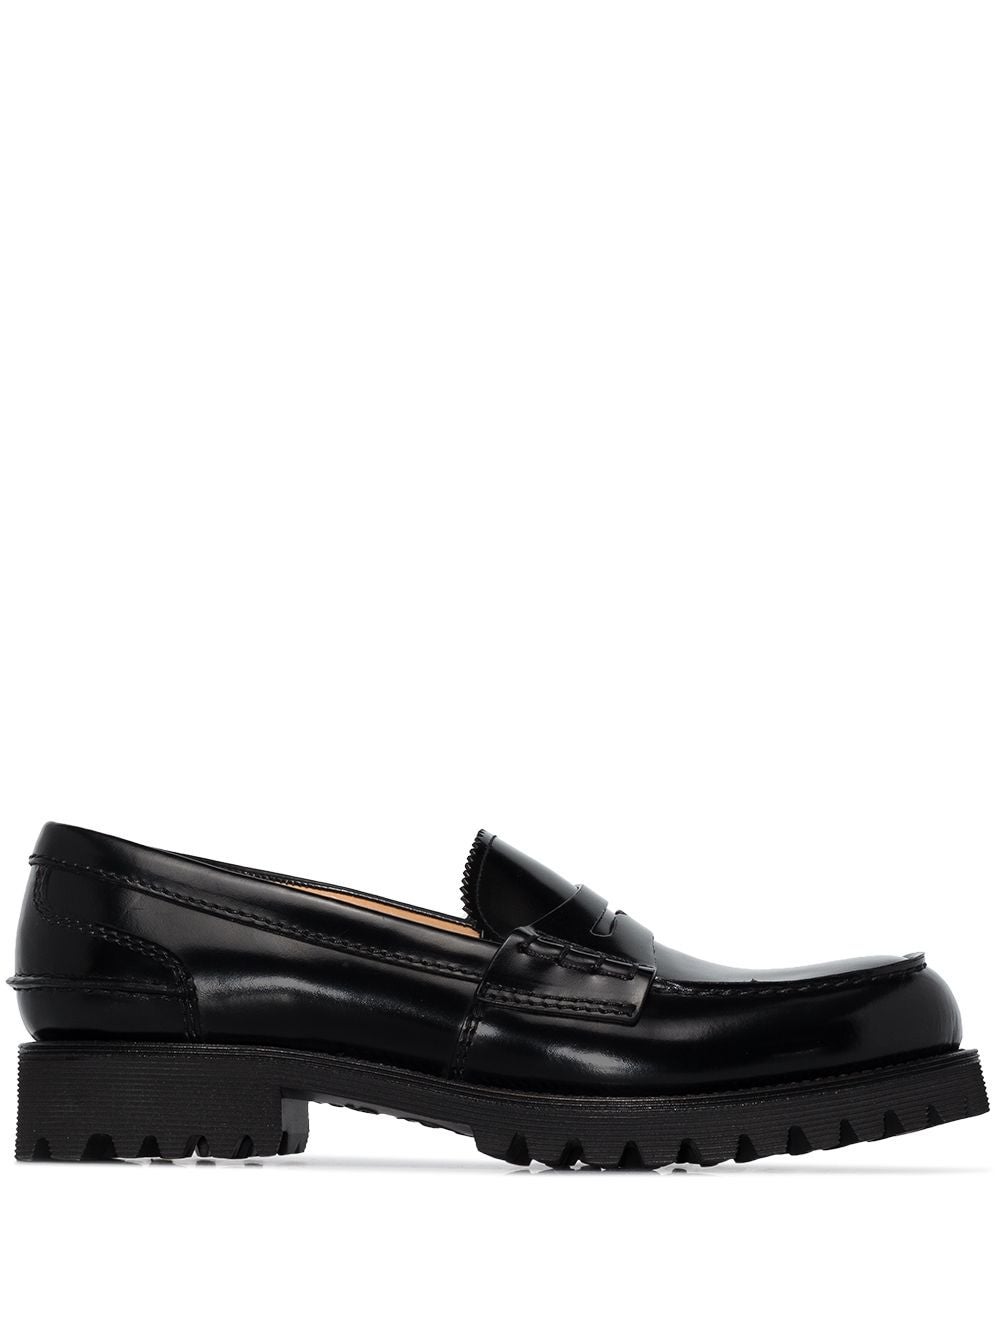 Church’s + Cameron Leather Loafers